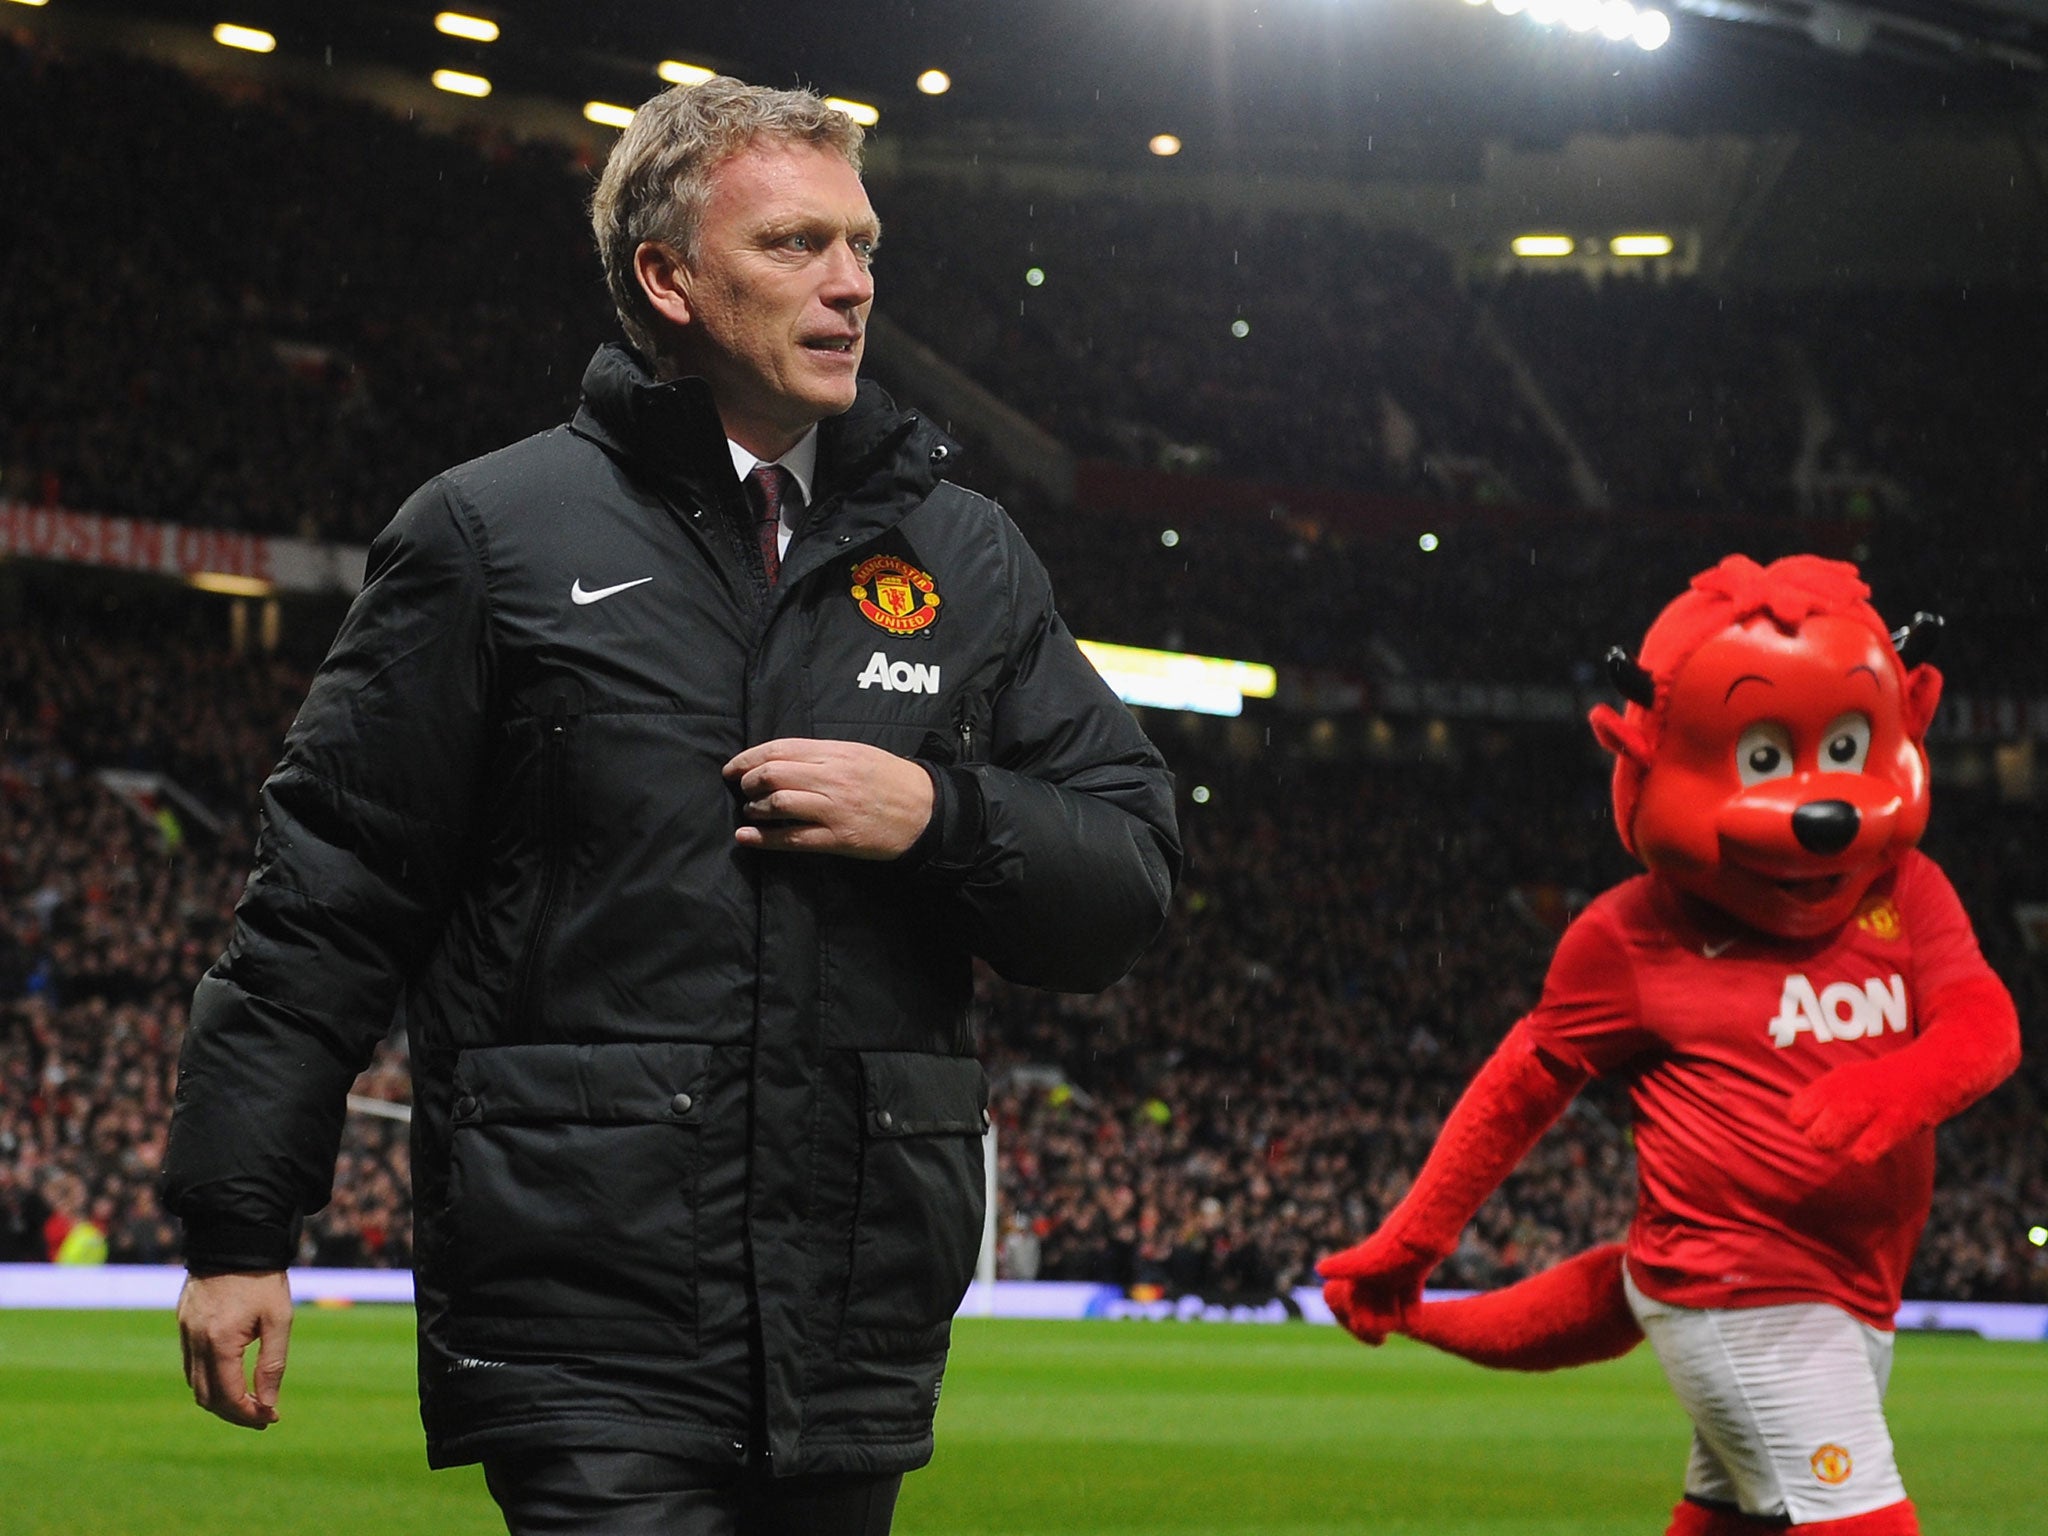 Manchester United manager David Moyes ahead of the Premier League clash with Tottenham